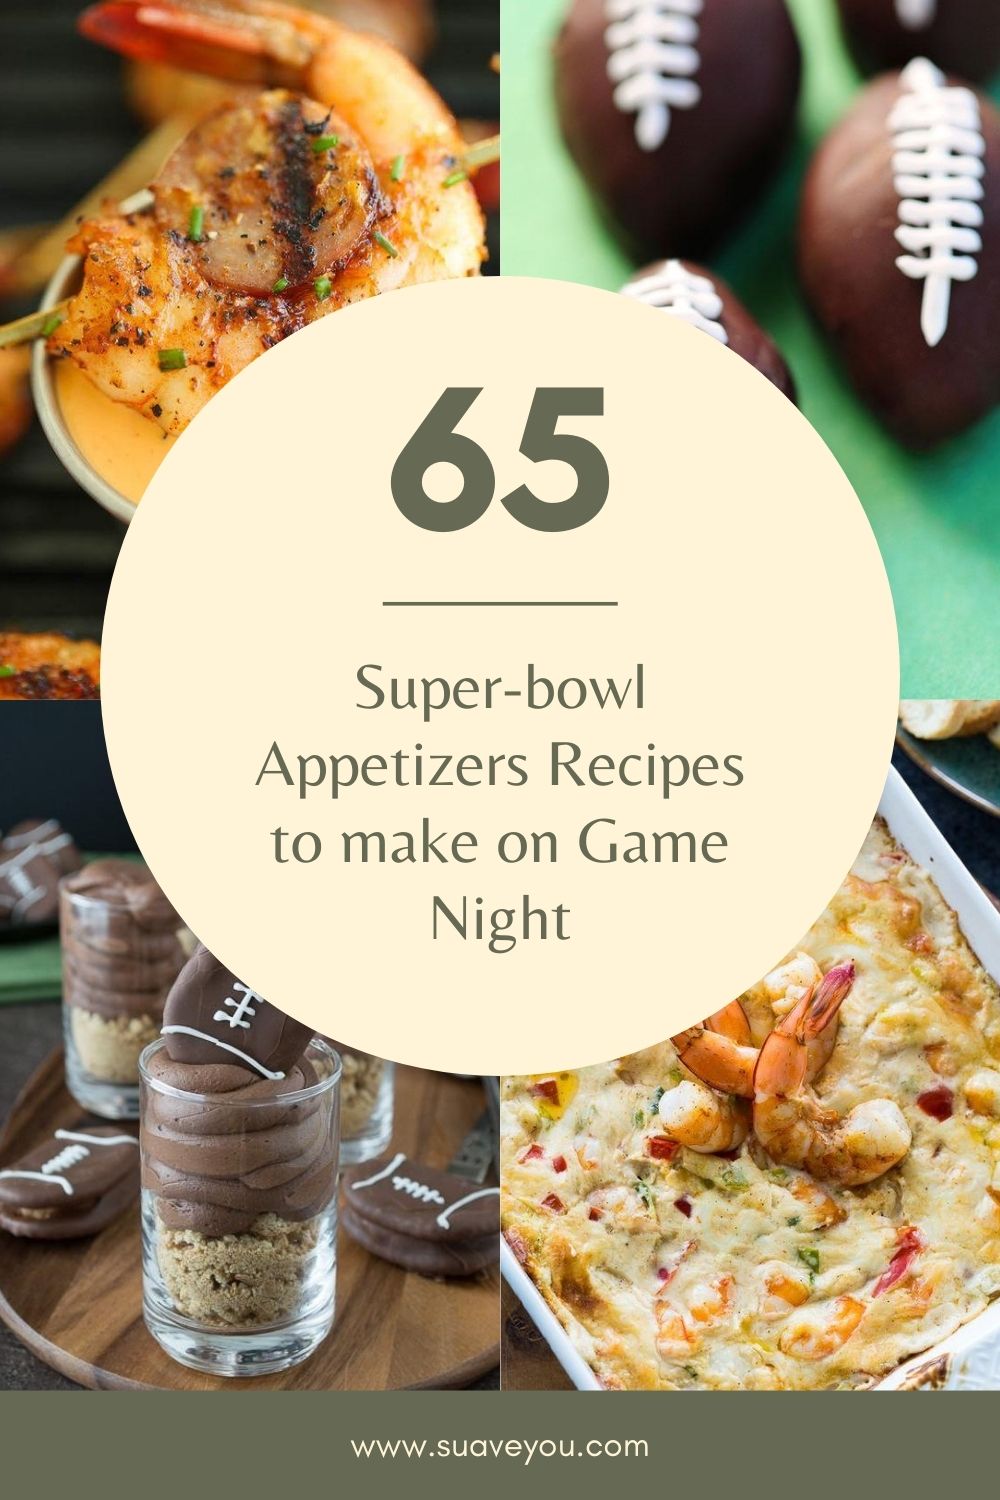 Super-bowl Appetizers Recipes to make on Game Night